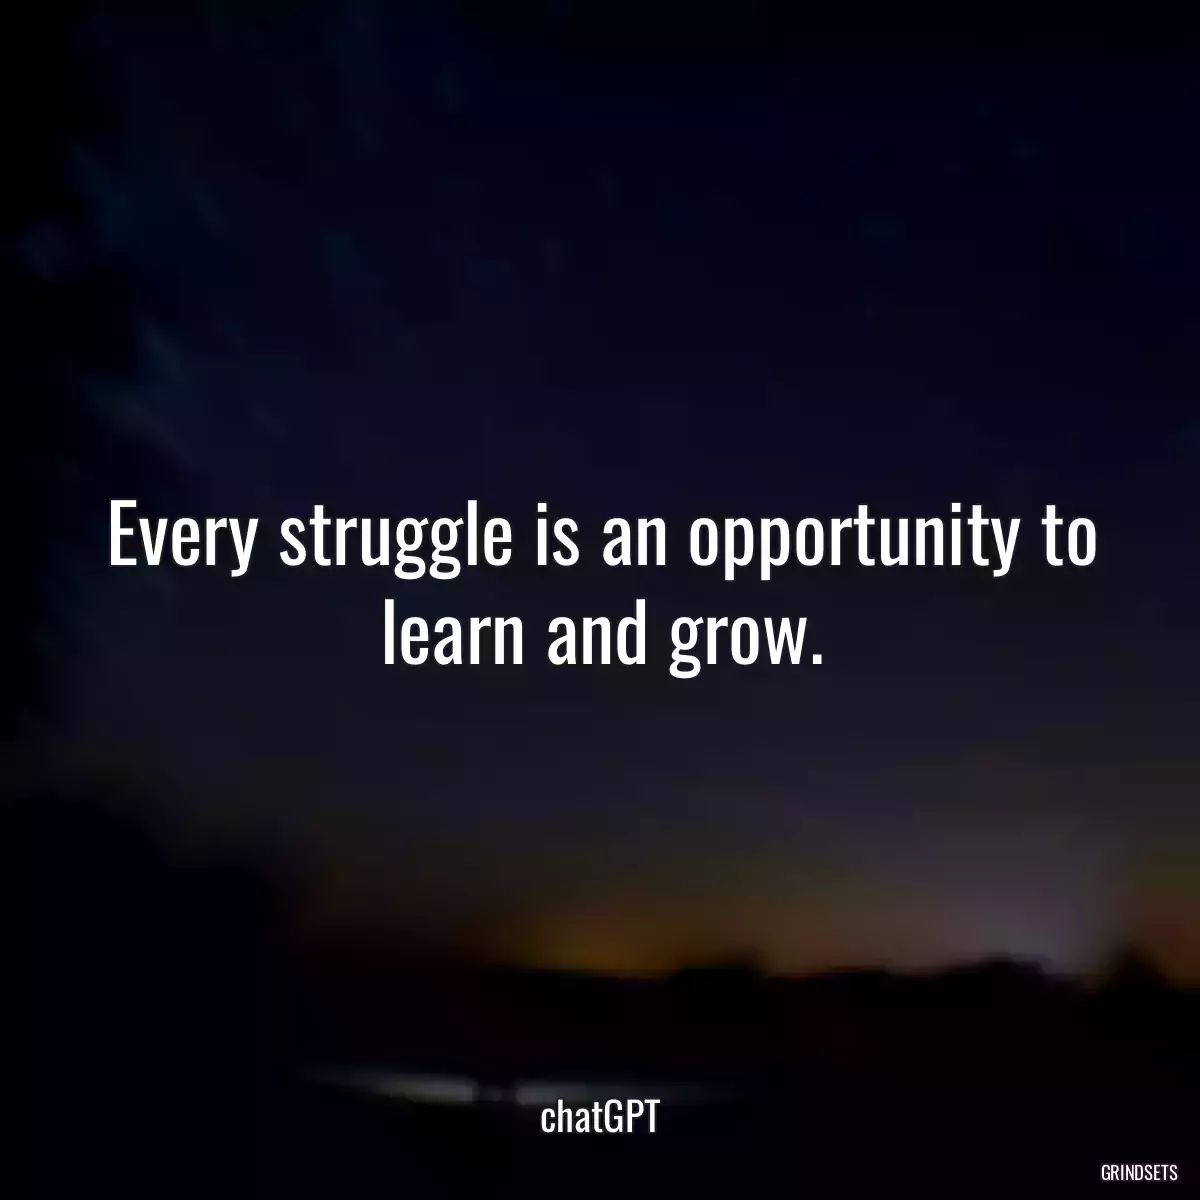 Every struggle is an opportunity to learn and grow.